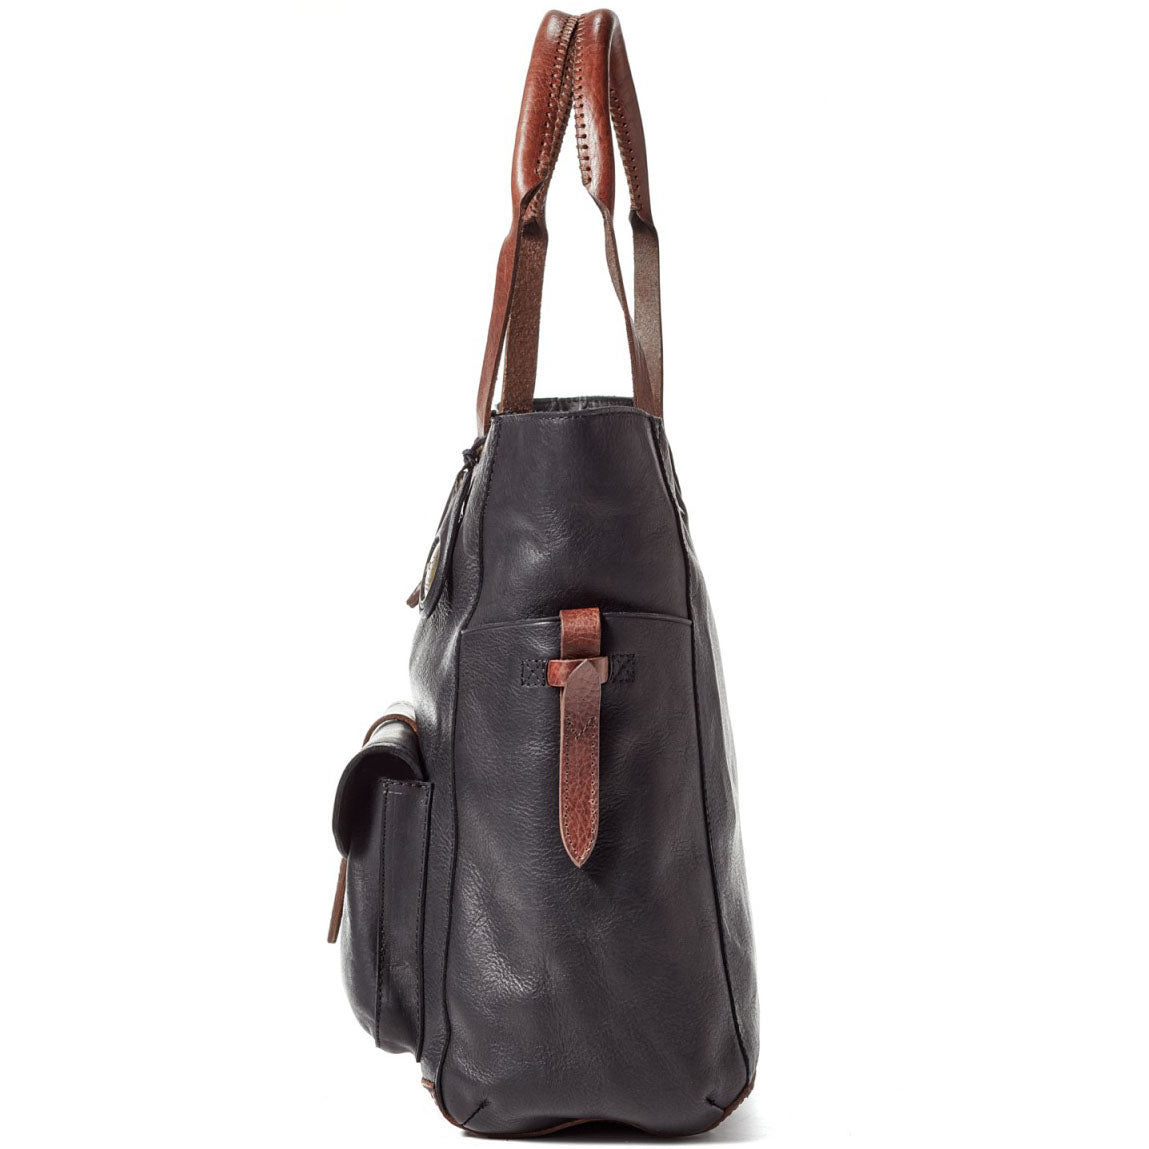 Will Leather Goods The Journey Collection Women's Ashland Tote Bridle Leather, Black